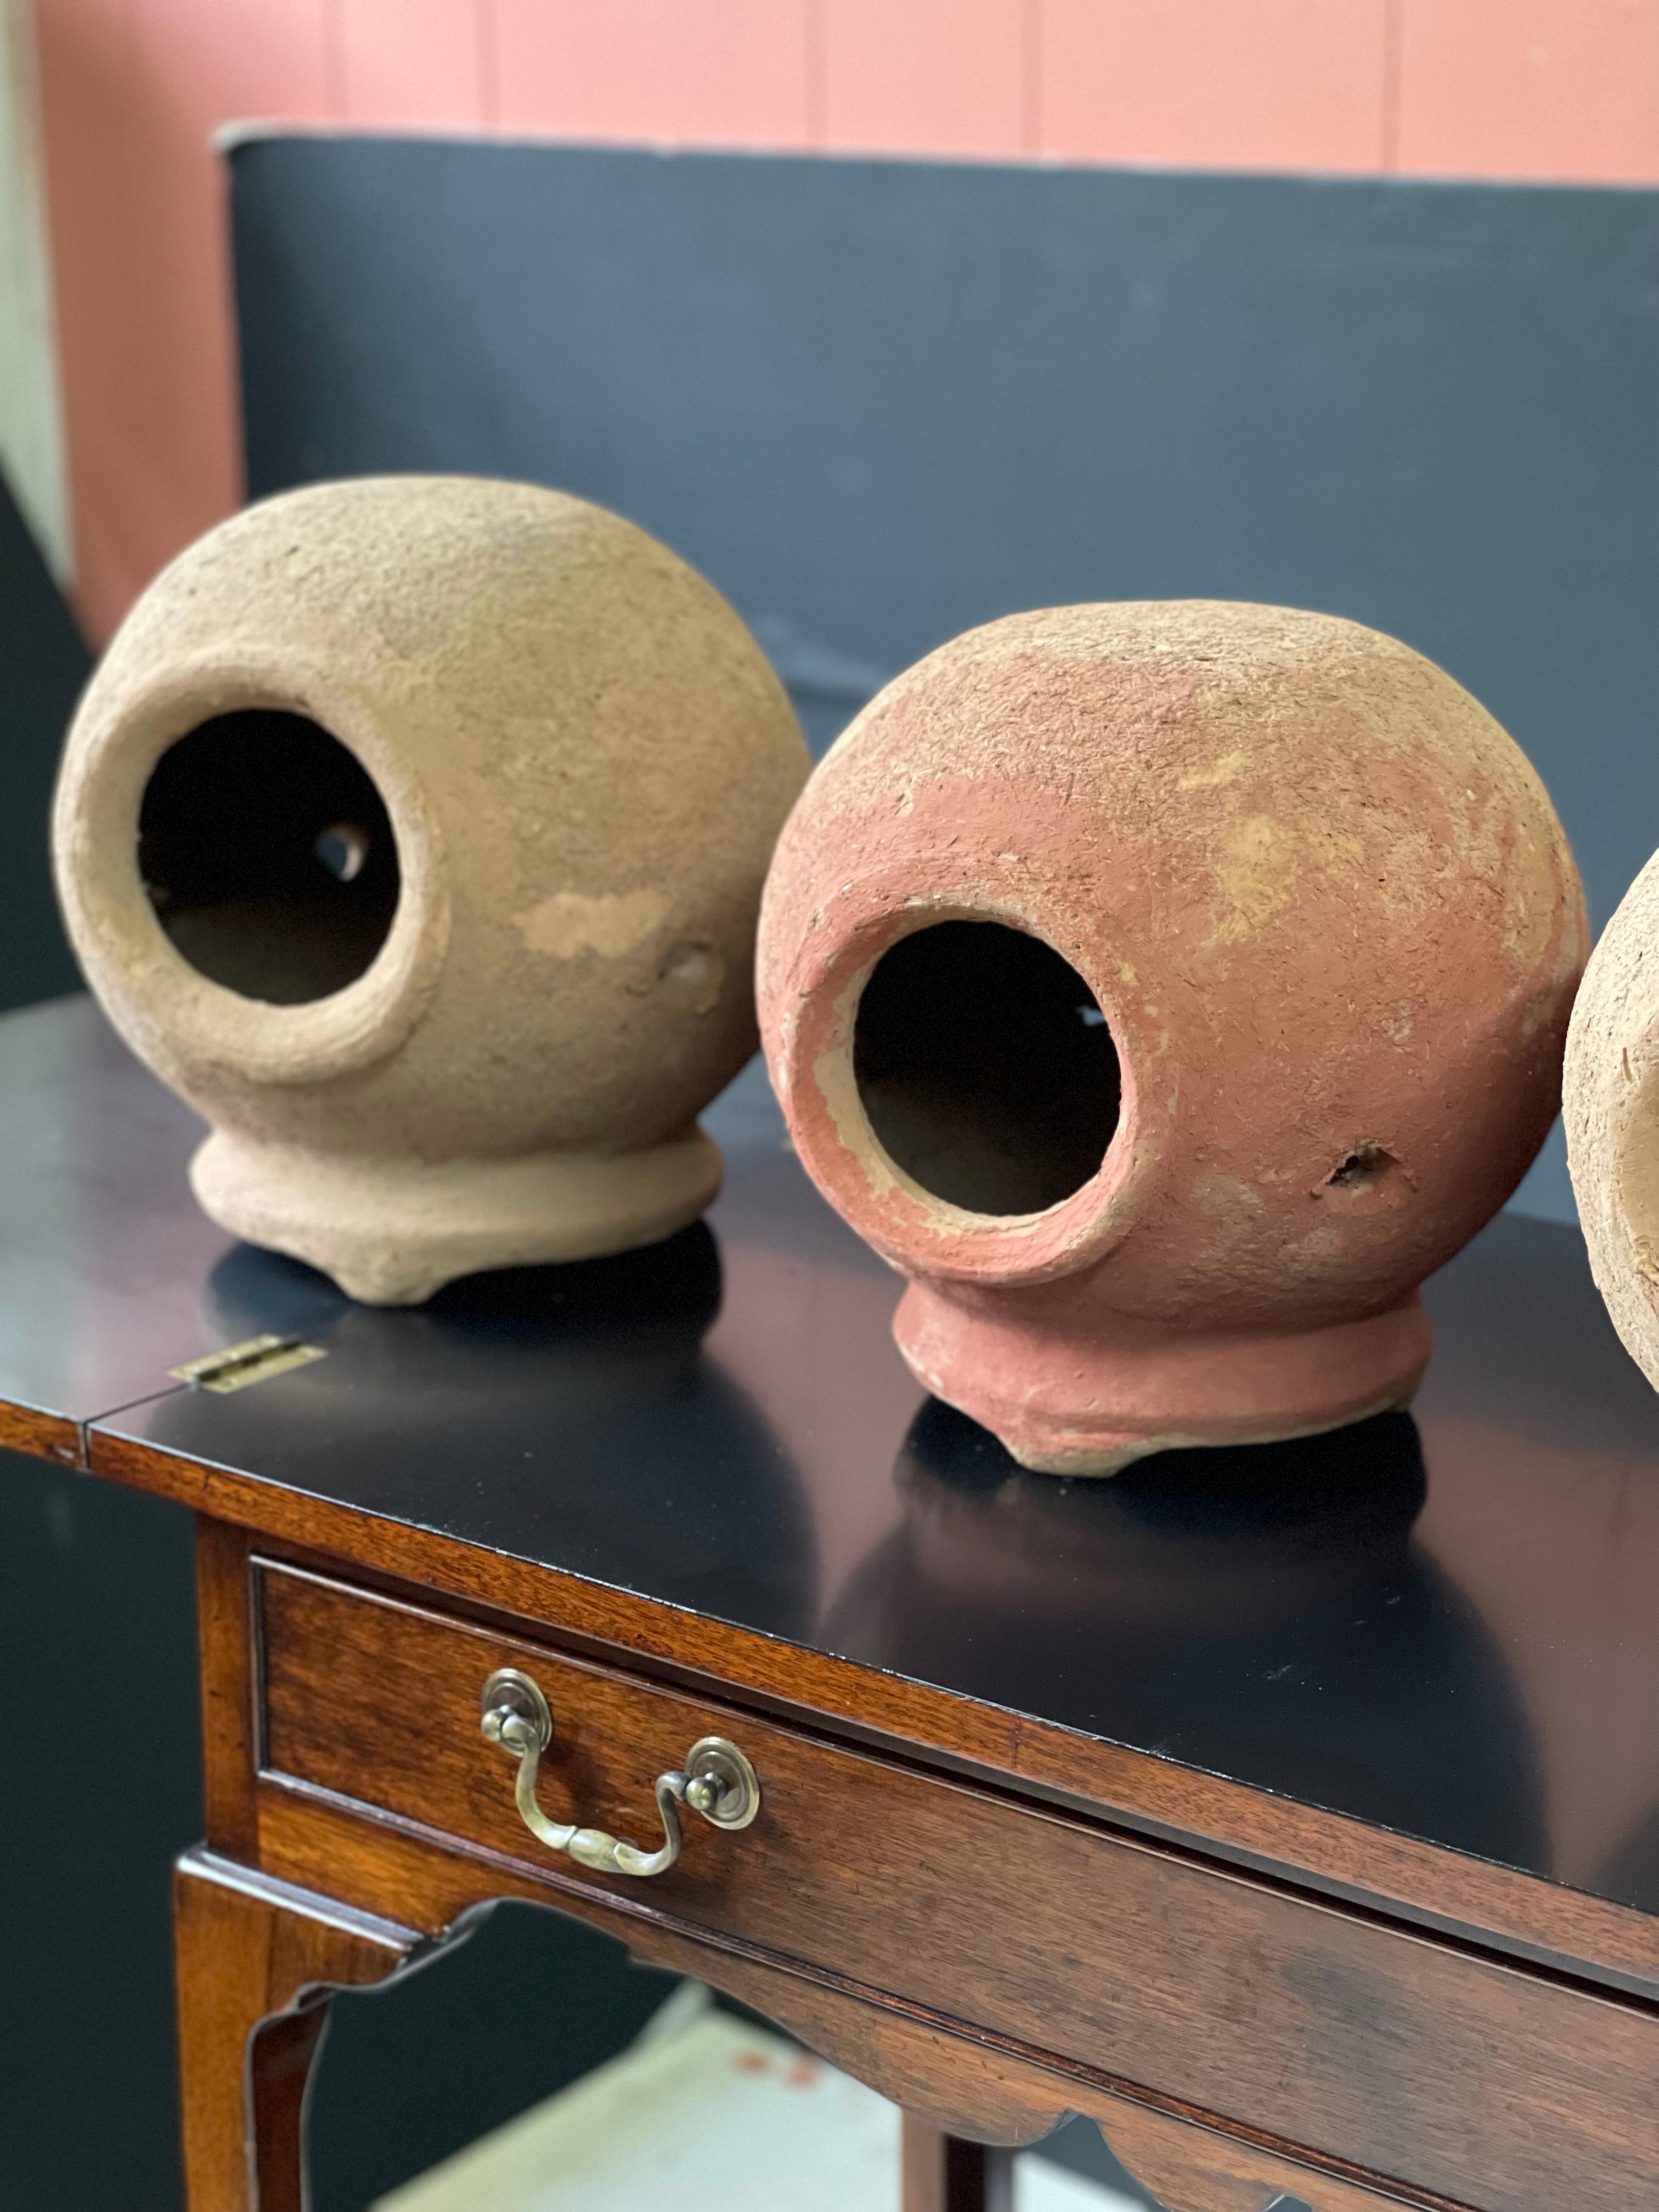 Collection of four vintage Mediterranean handmade terracotta pots. Use your imagination to display these amazing pieces as sculpture, use as planters, or convert into lighting.